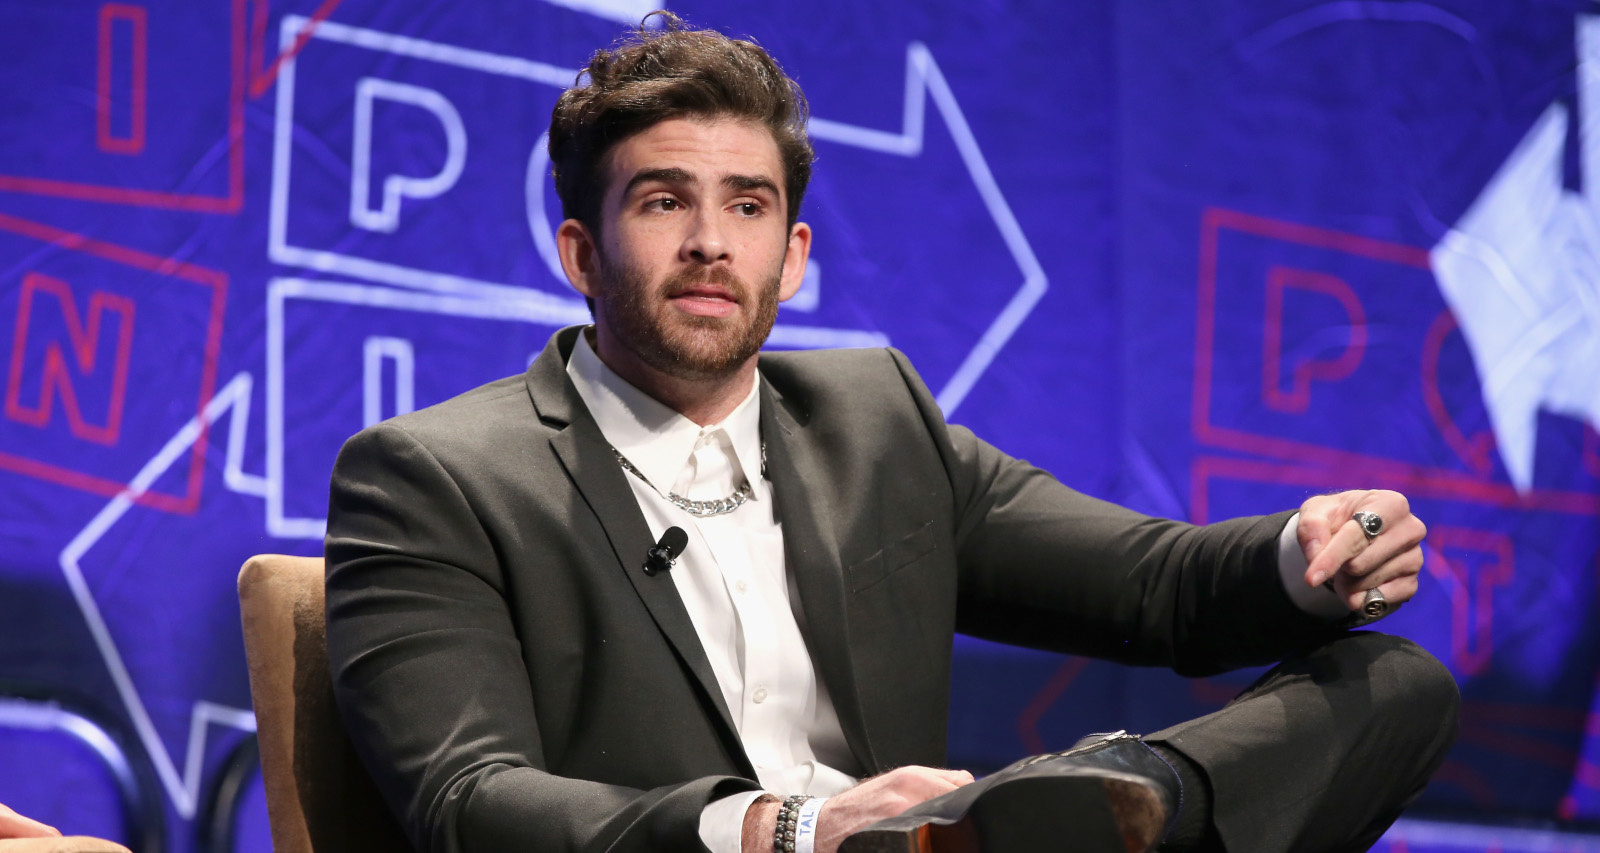 Hasan Piker Wiki: Facts About “The Young Turks” Political Commentator